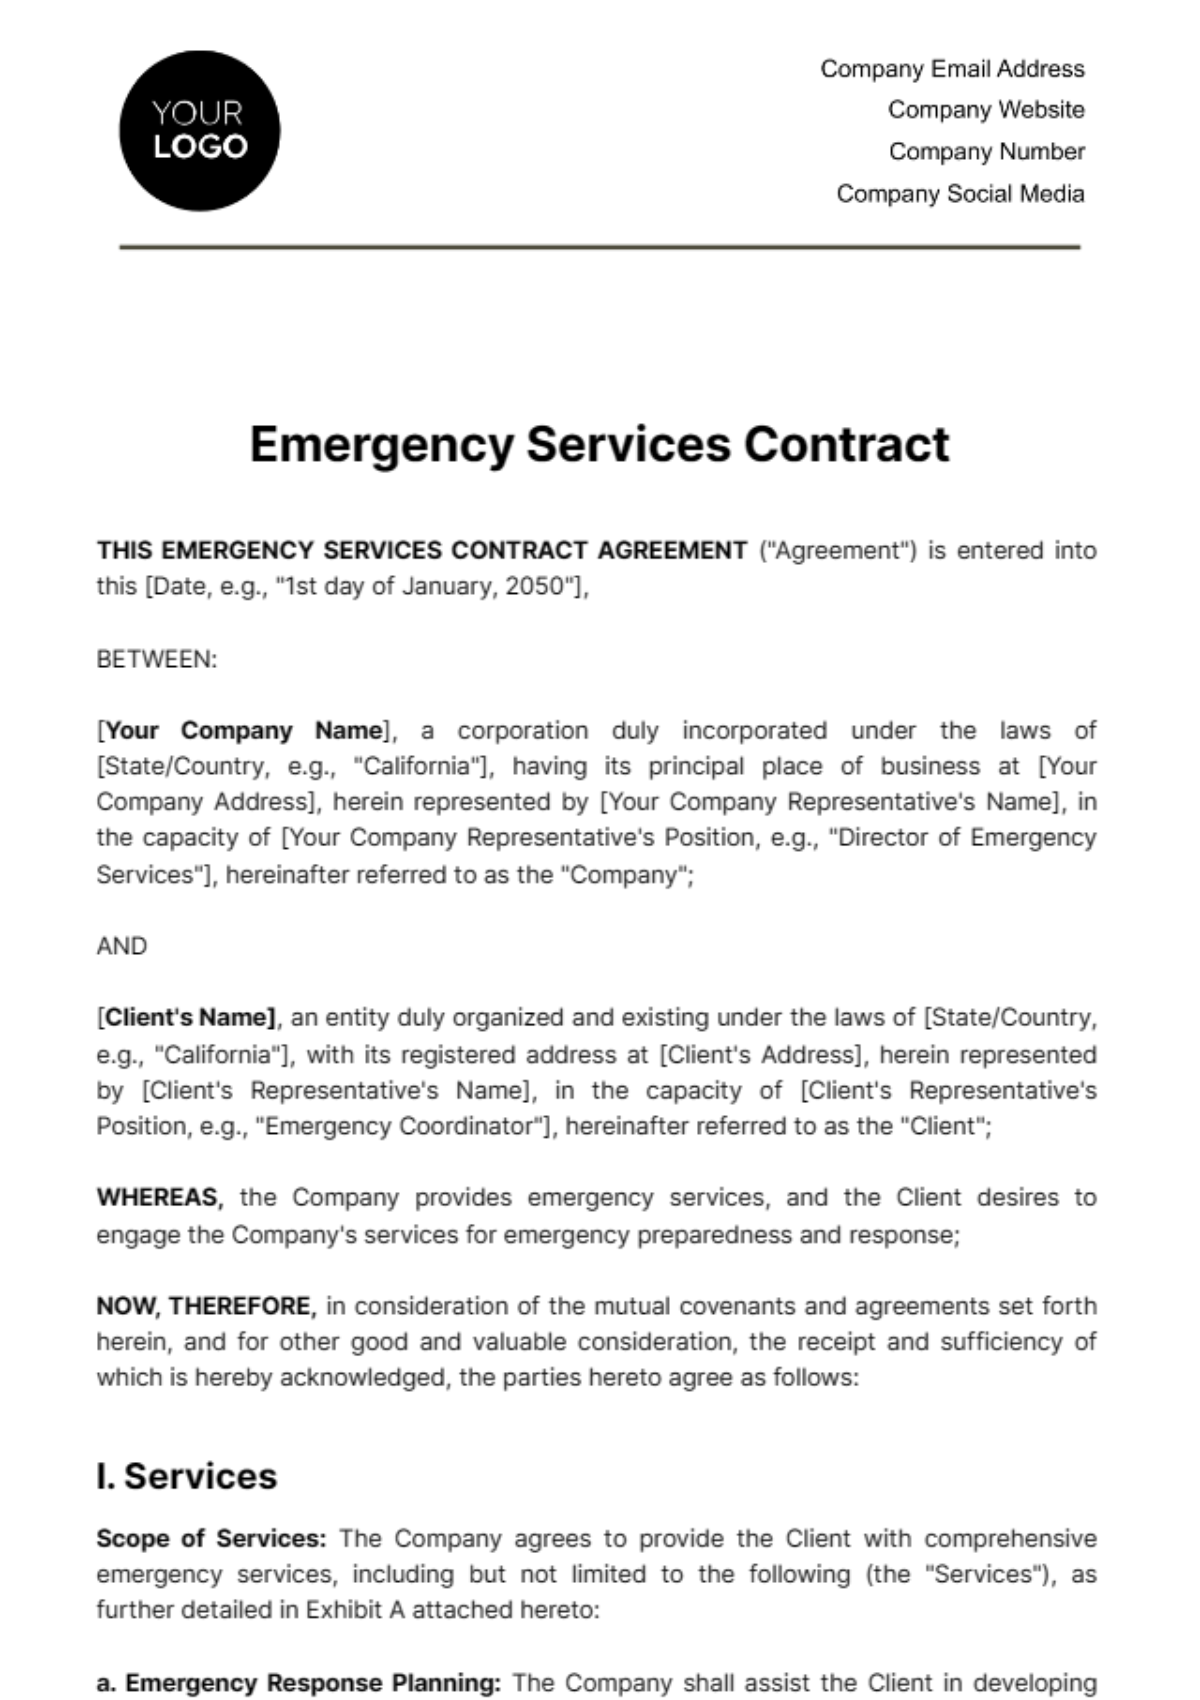 Emergency Services Contract Template